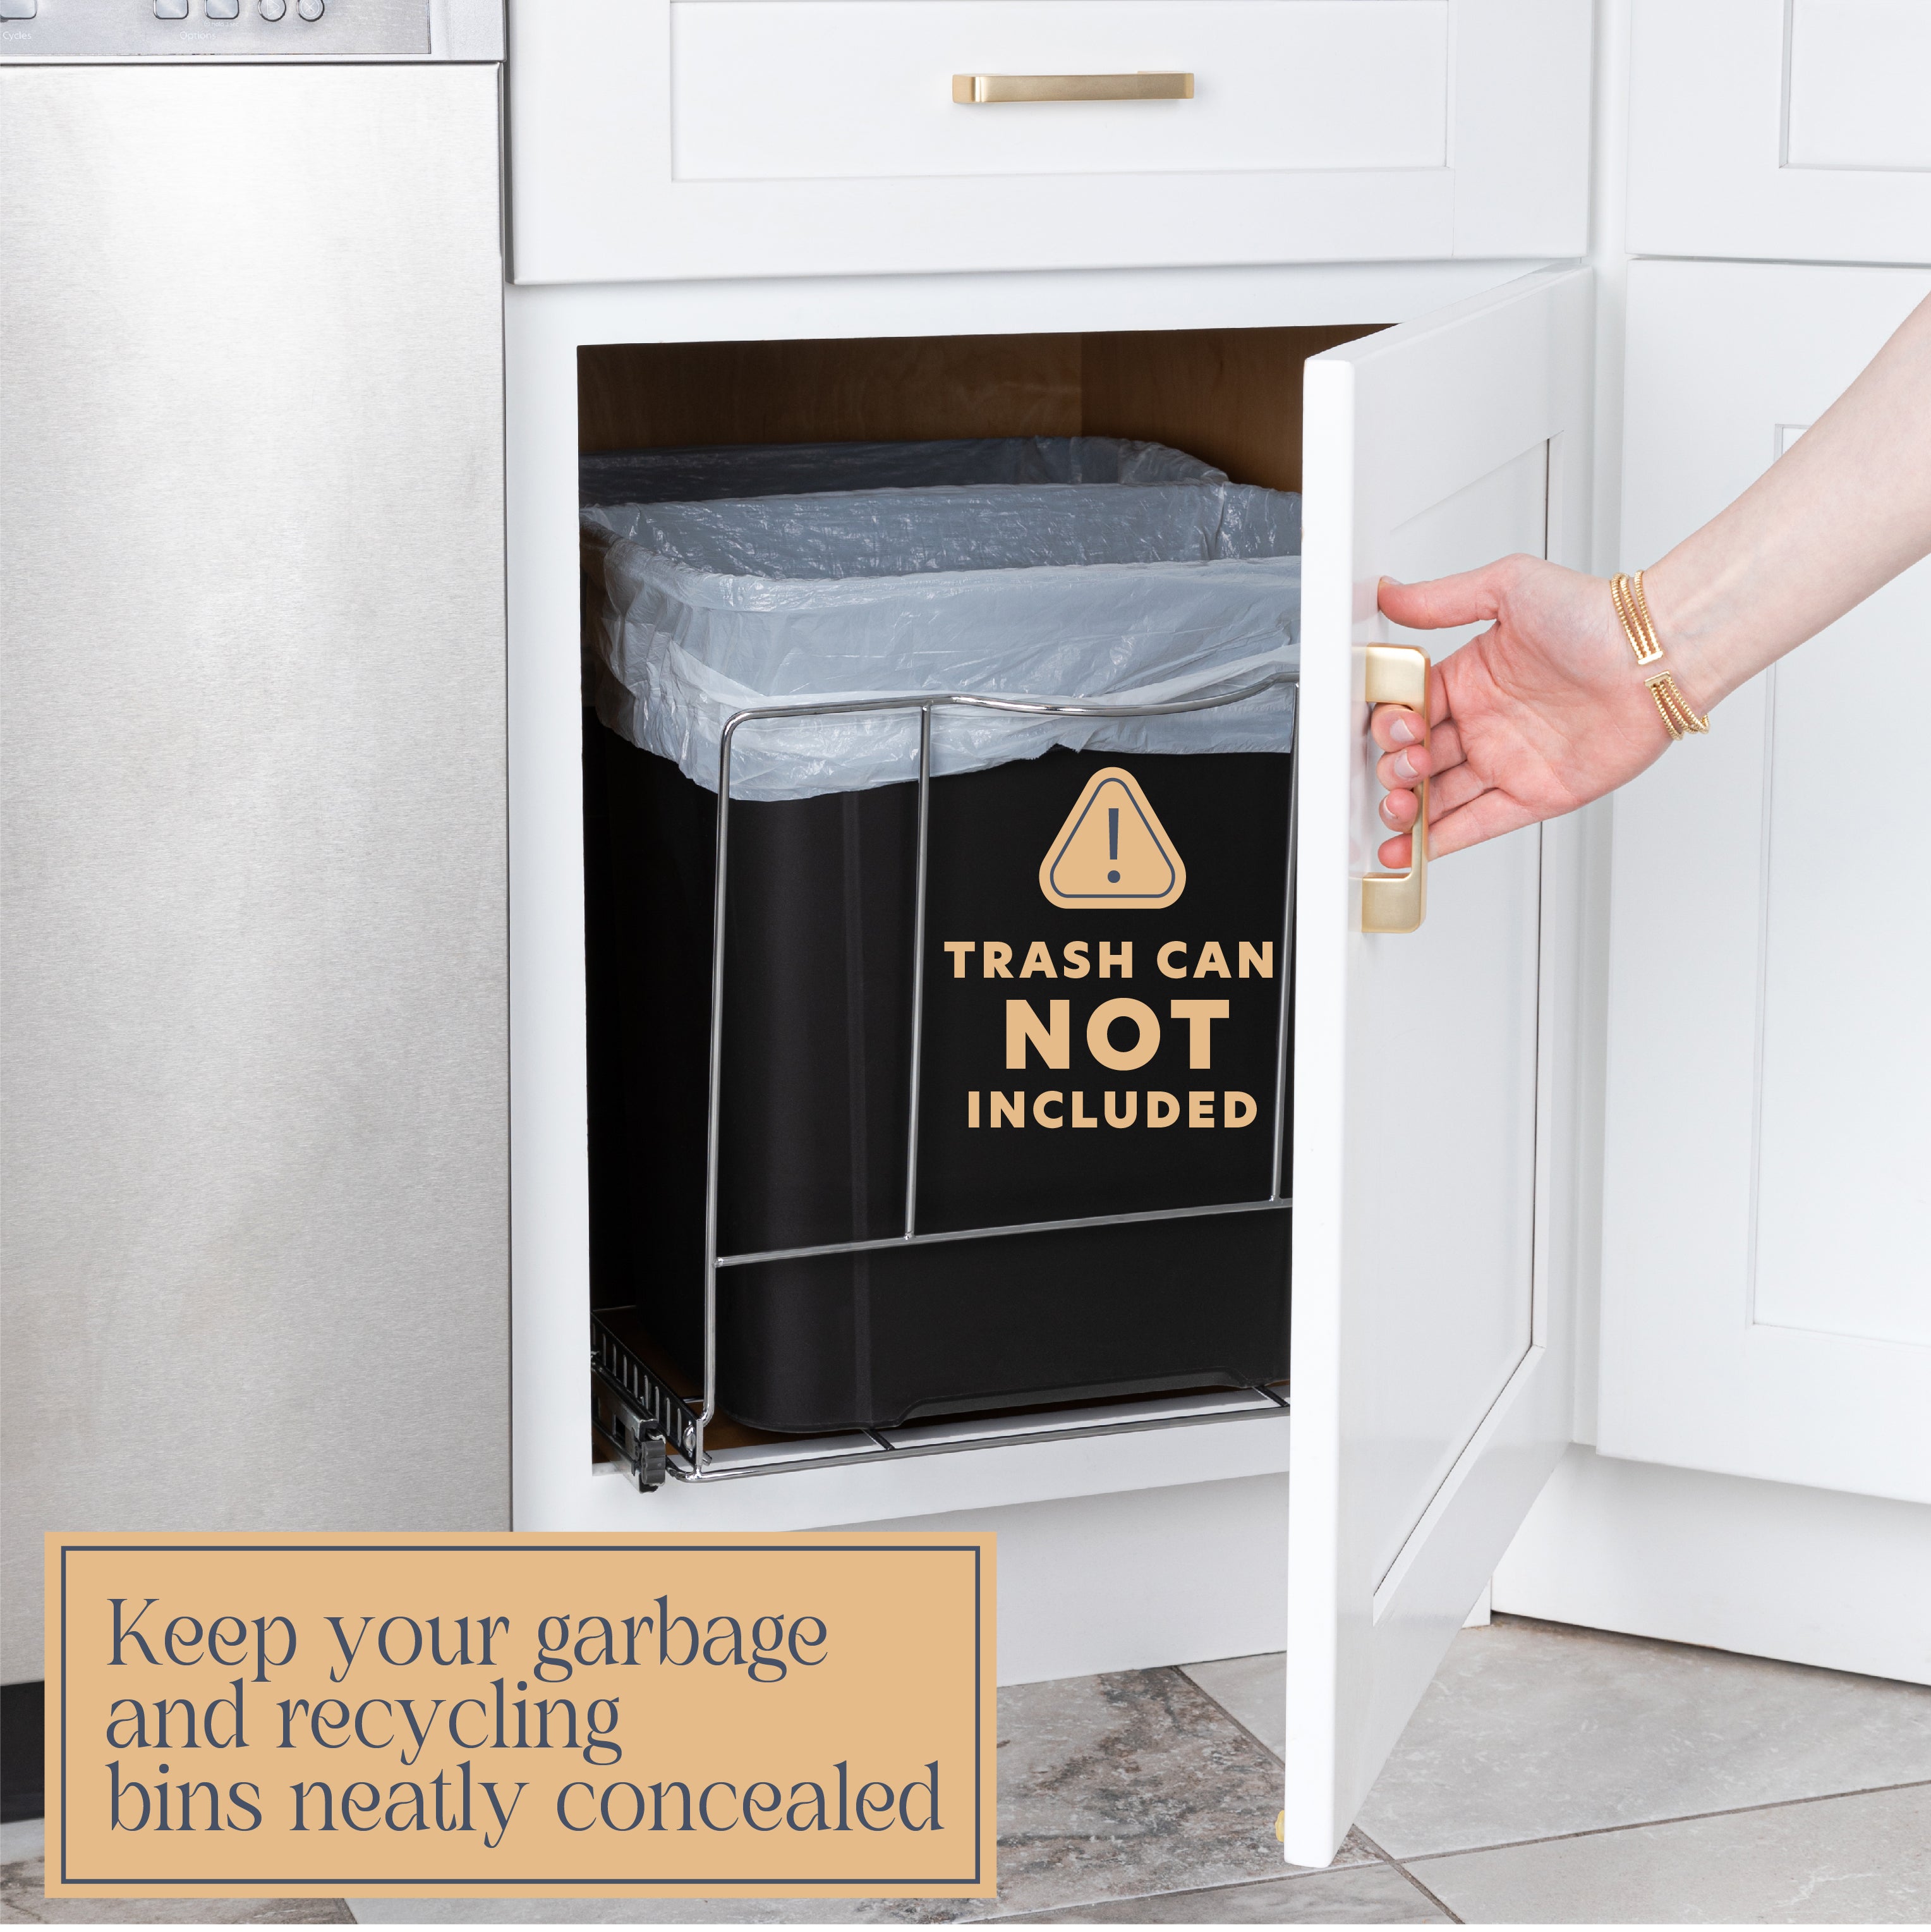 Pull Out Double Trash Can Under Cabinet – Heavy Duty Metal Sliding System with 5 Year Limited Warranty, Adjustable Sliding Garbage Can Shelf -Cans Not Included- fits 2 Waste/Recycling Bins